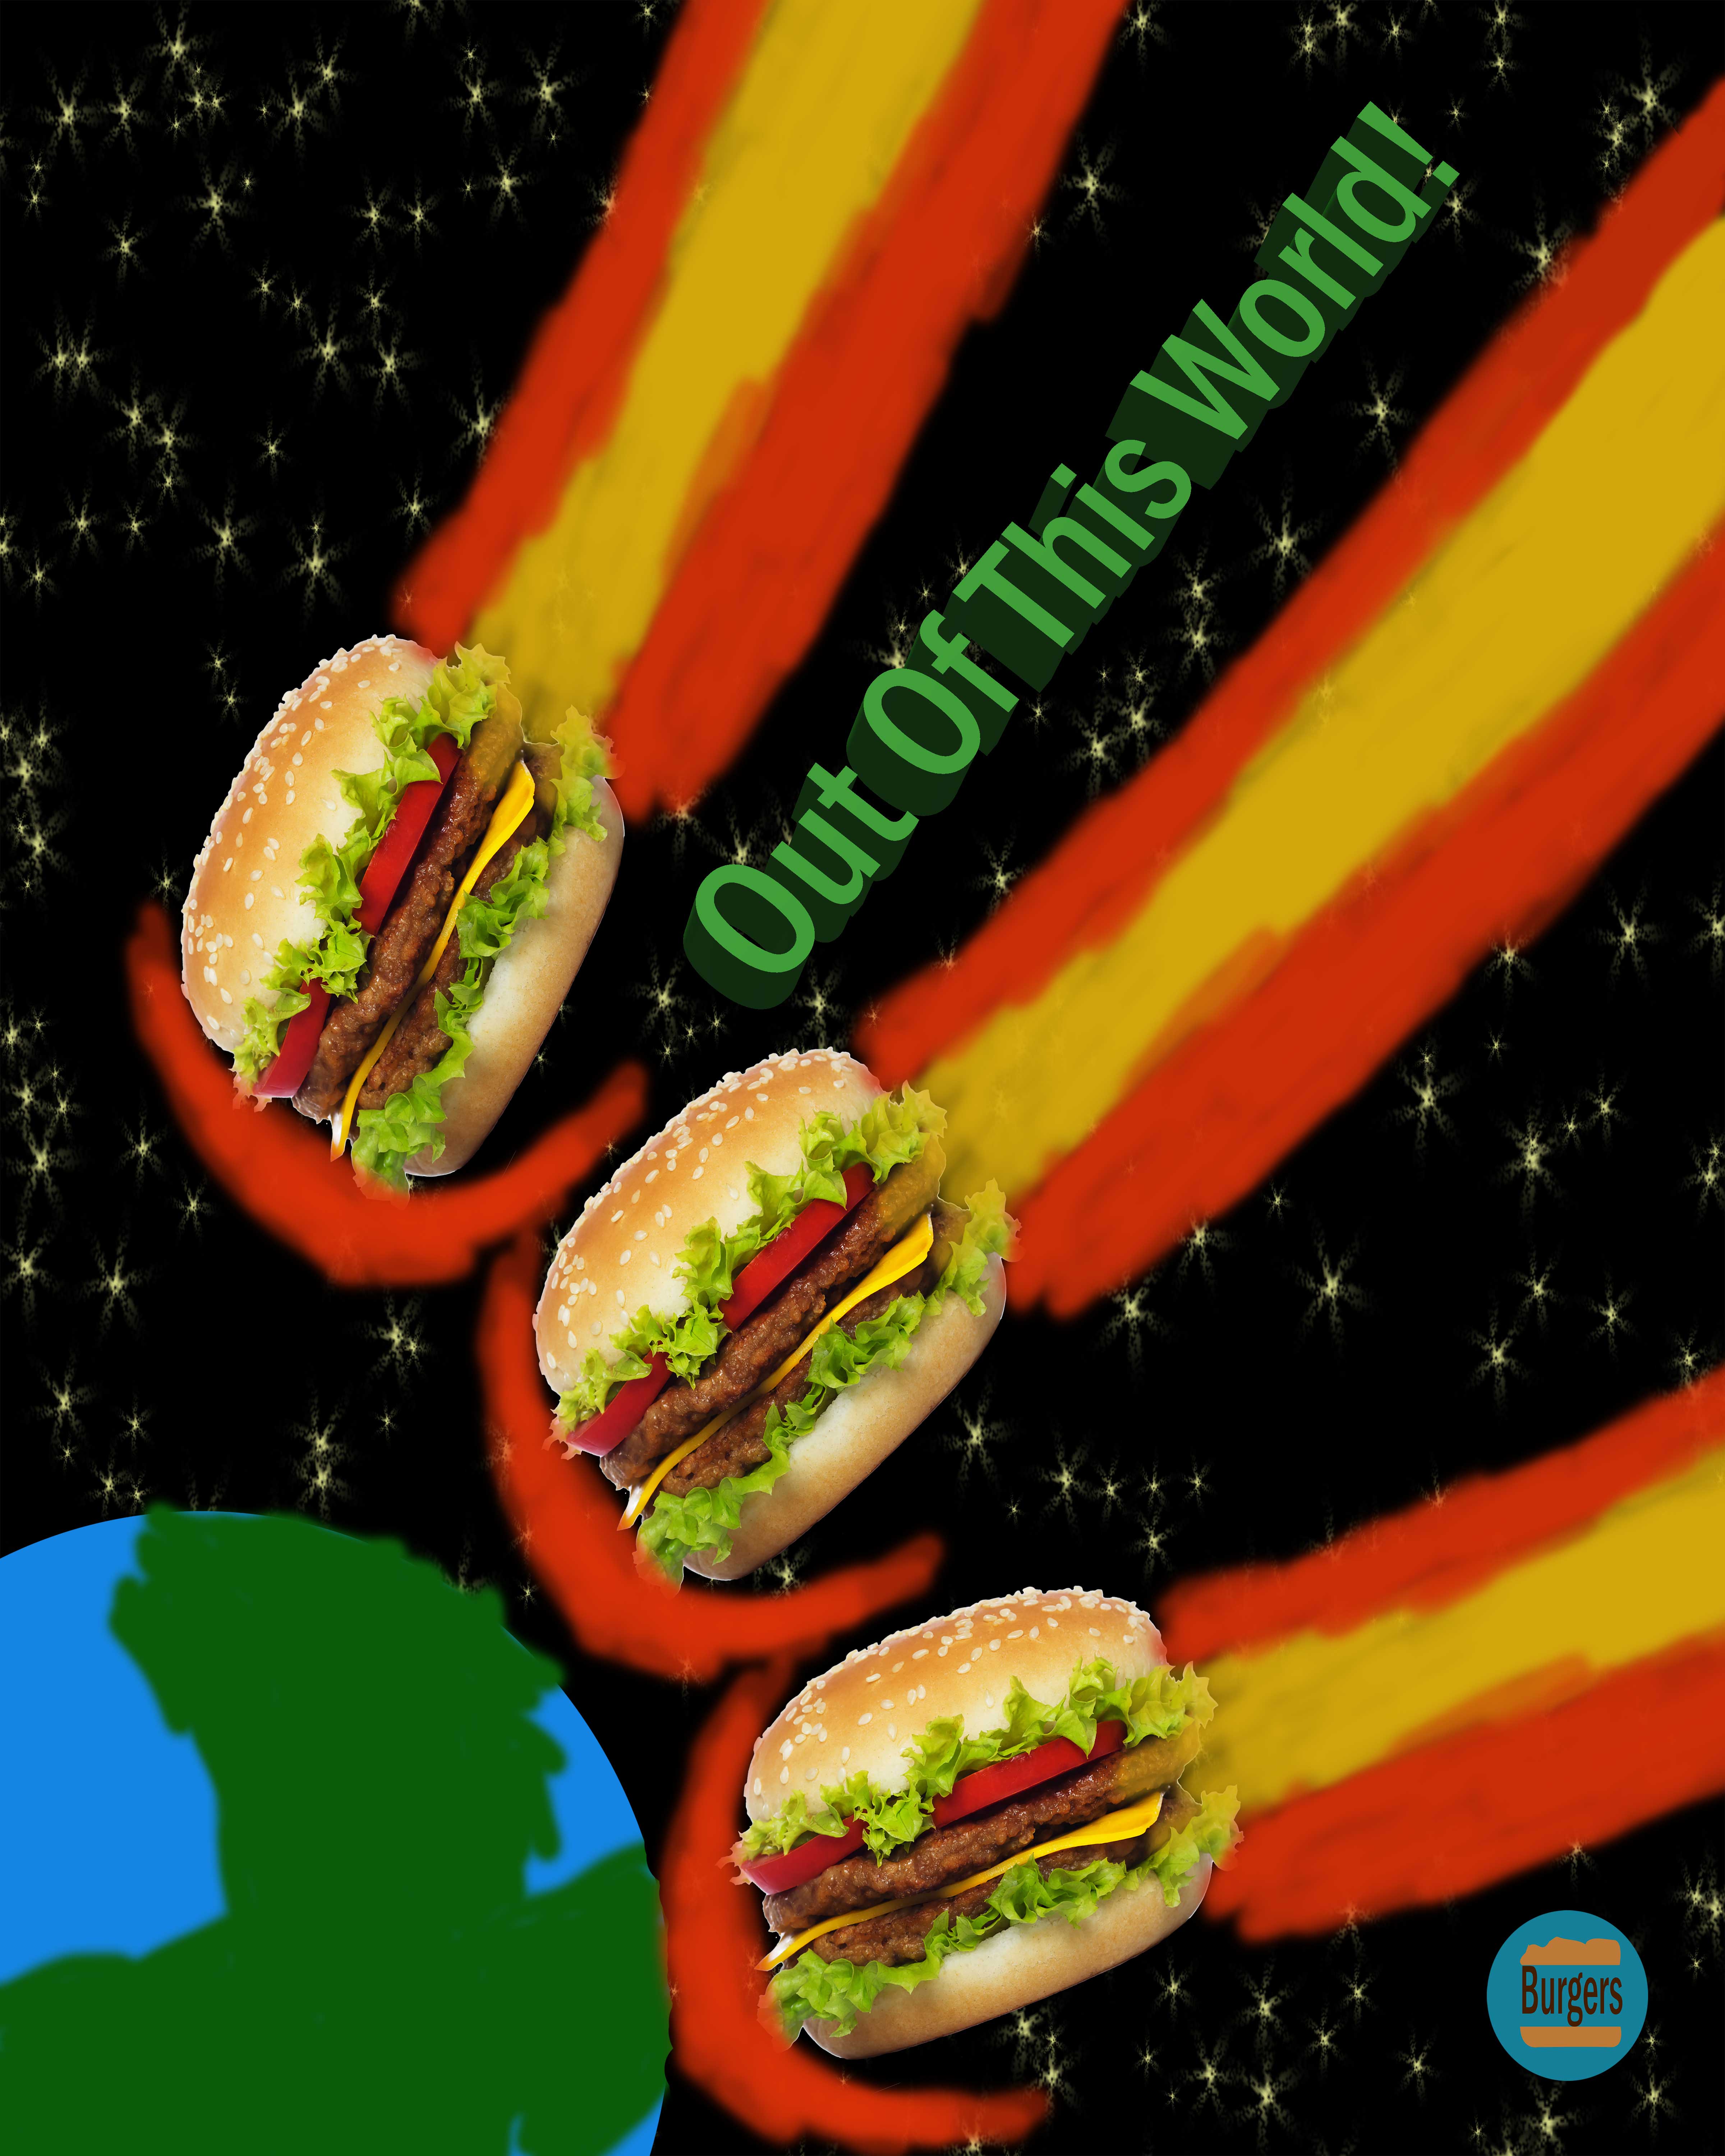 Another burger ad, but with a modern look. This ad shows three giant burgers hurtling towards the earth, with the text 'Out of this word'.